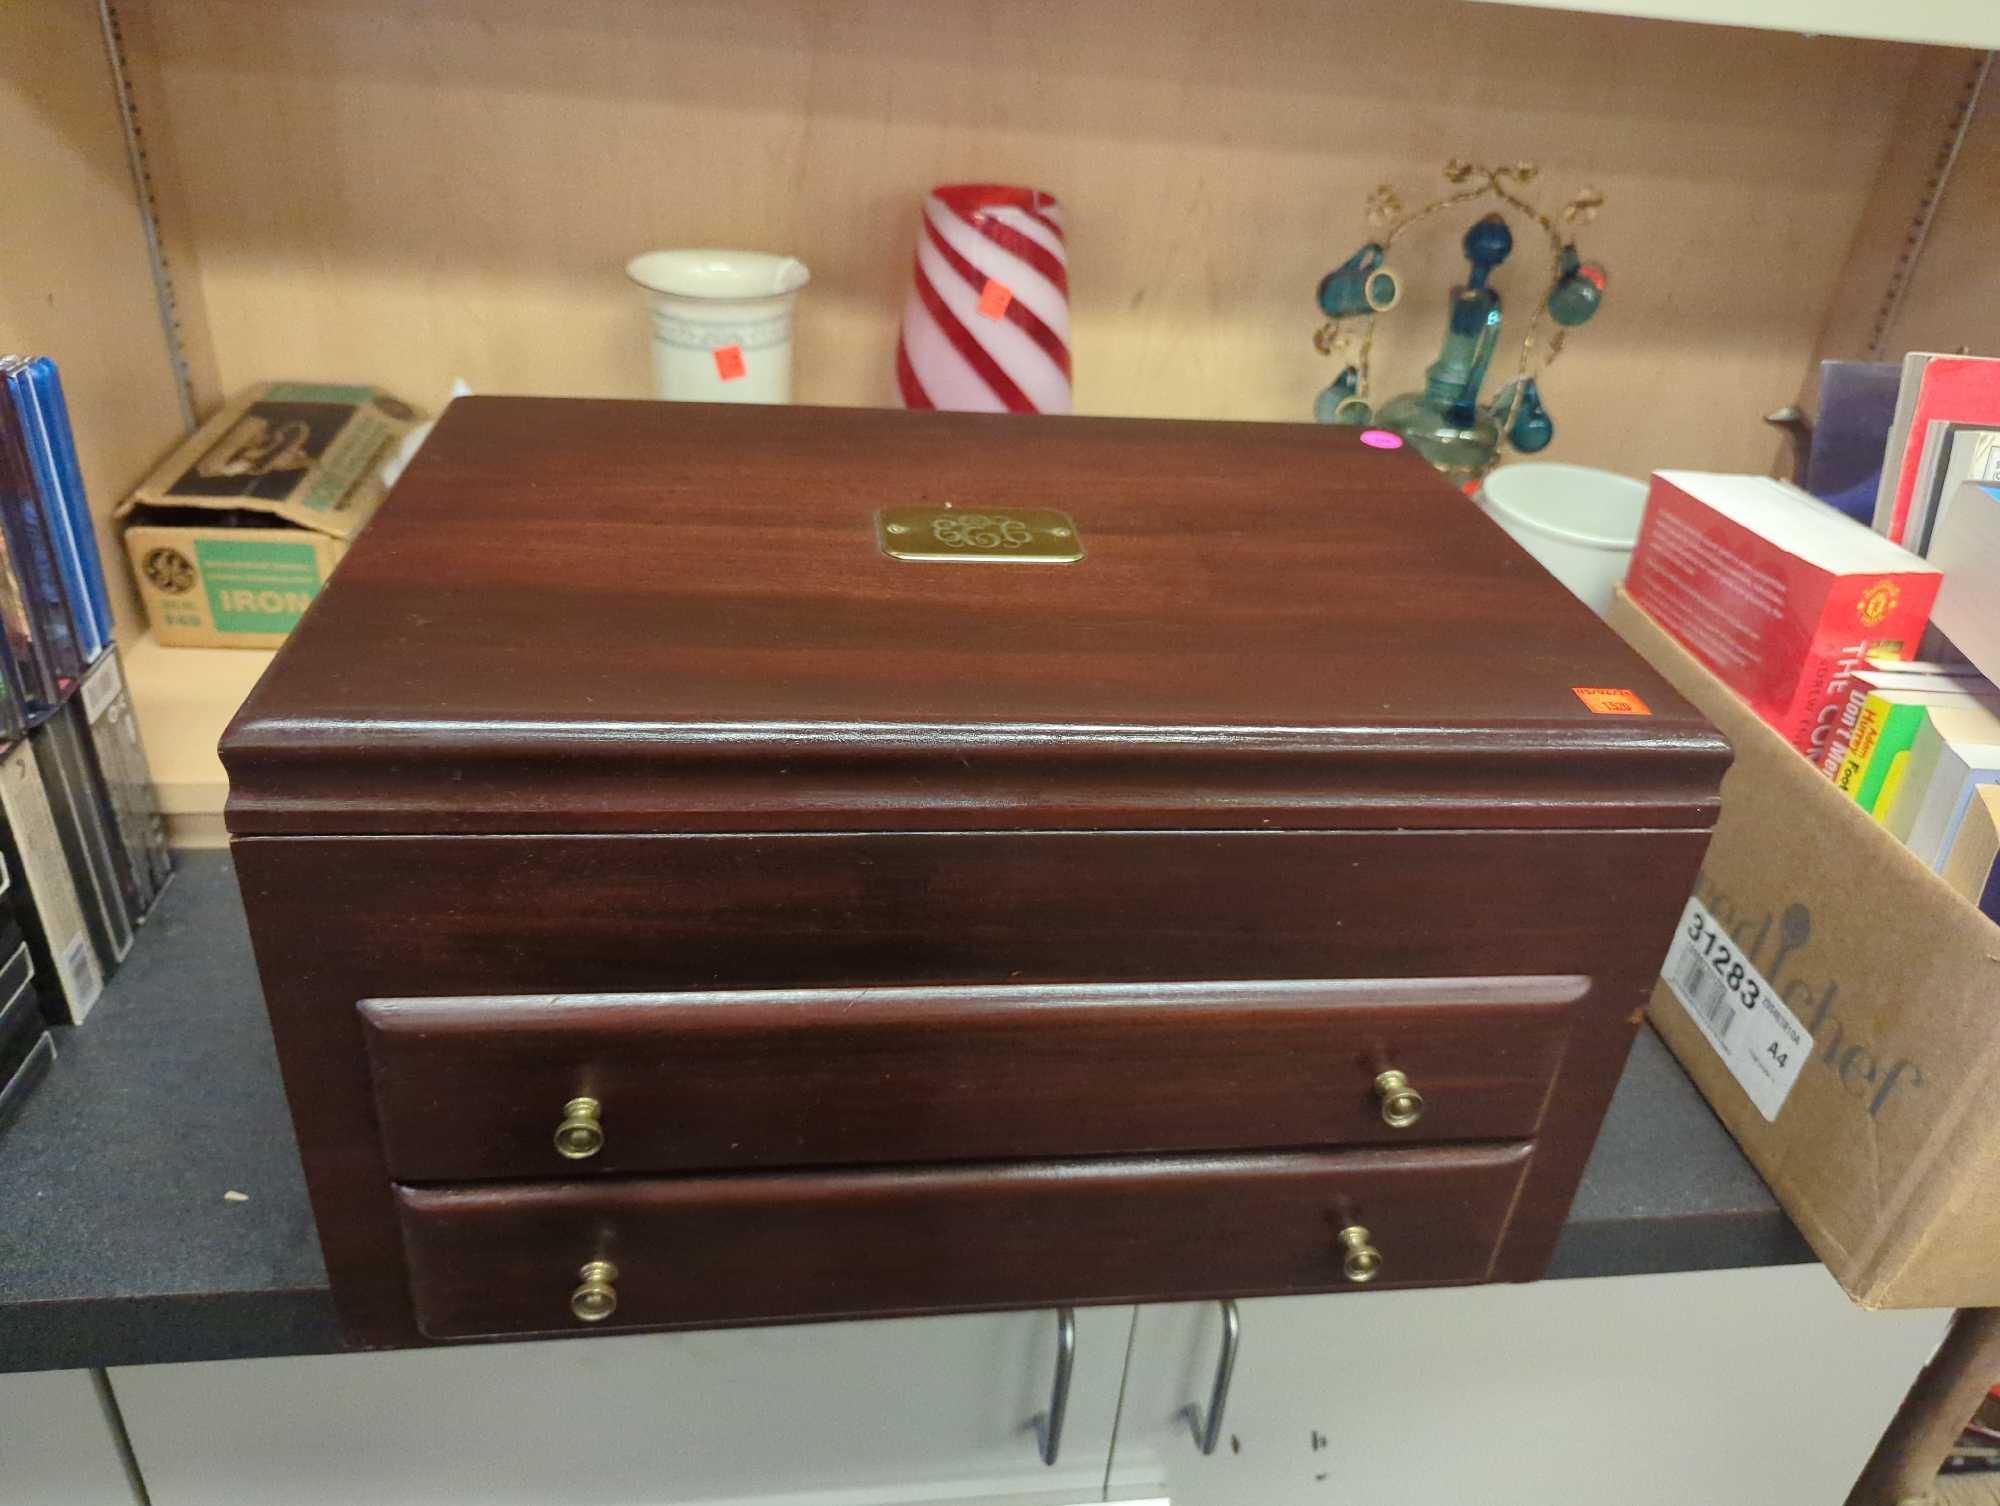 Old Colony Cherry Stained Mahogany Silverware Saver Box with Lift Lid with 2 Drawers, Approximate